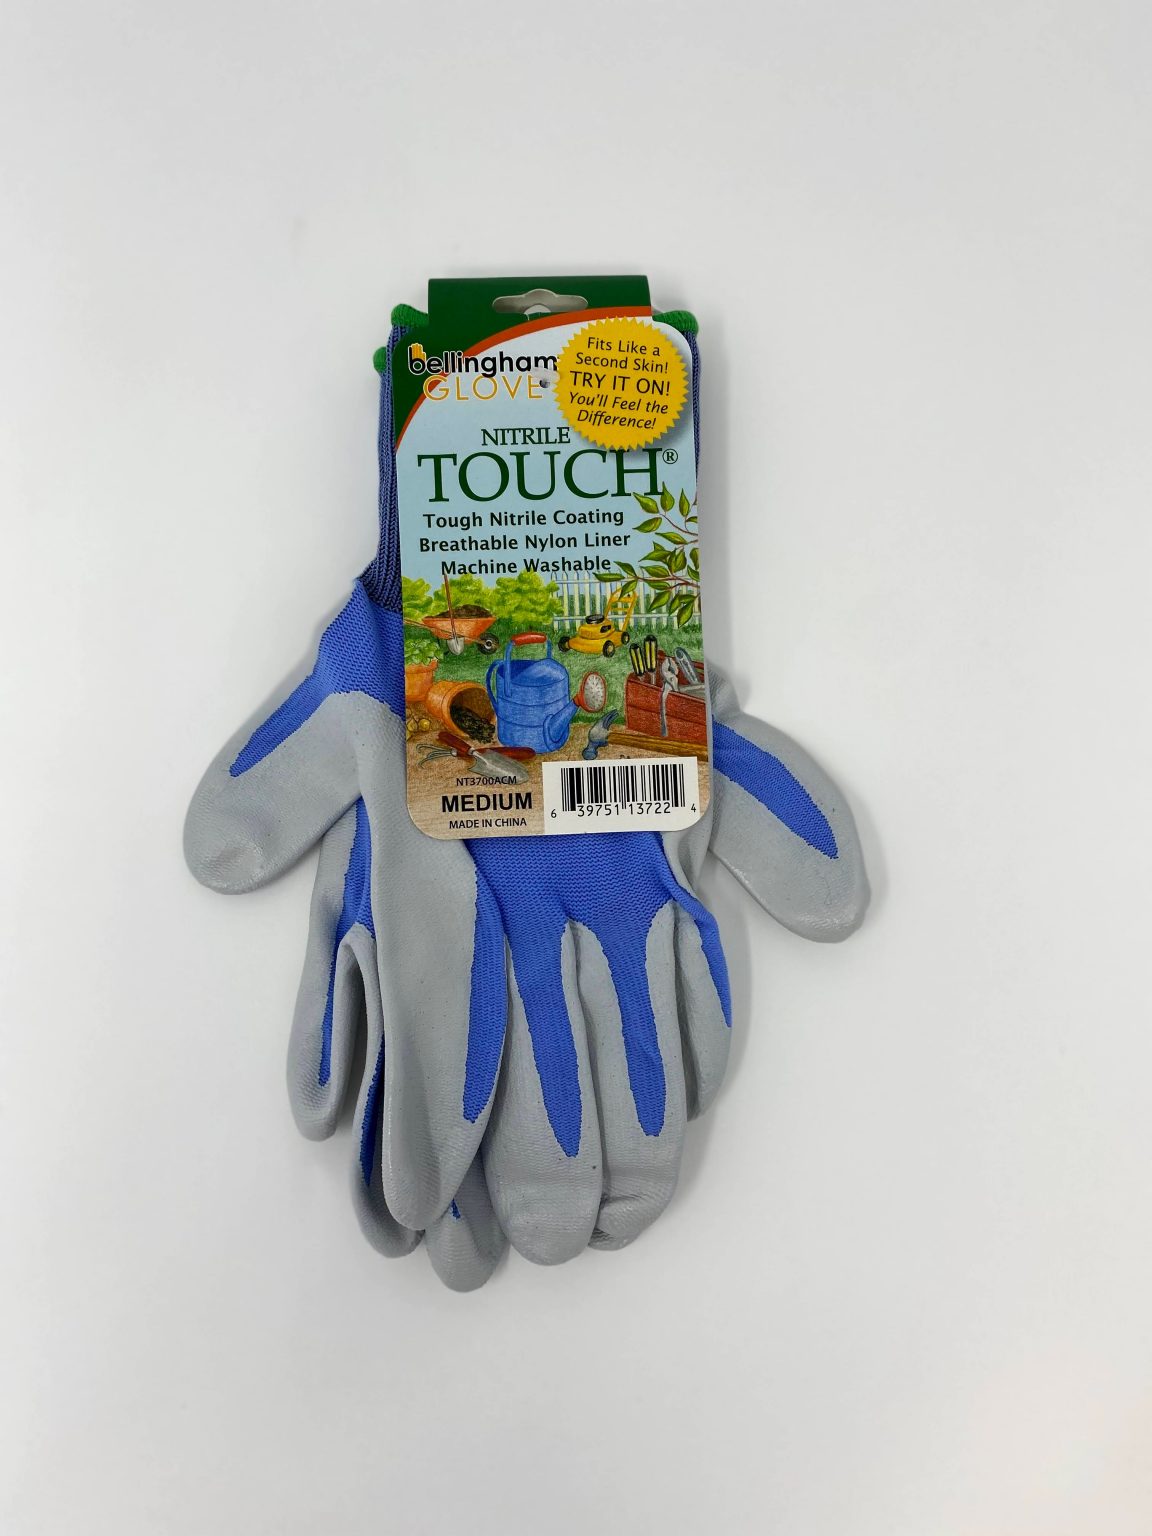 Nitrile TOUCH® Bellingham glove in blue color